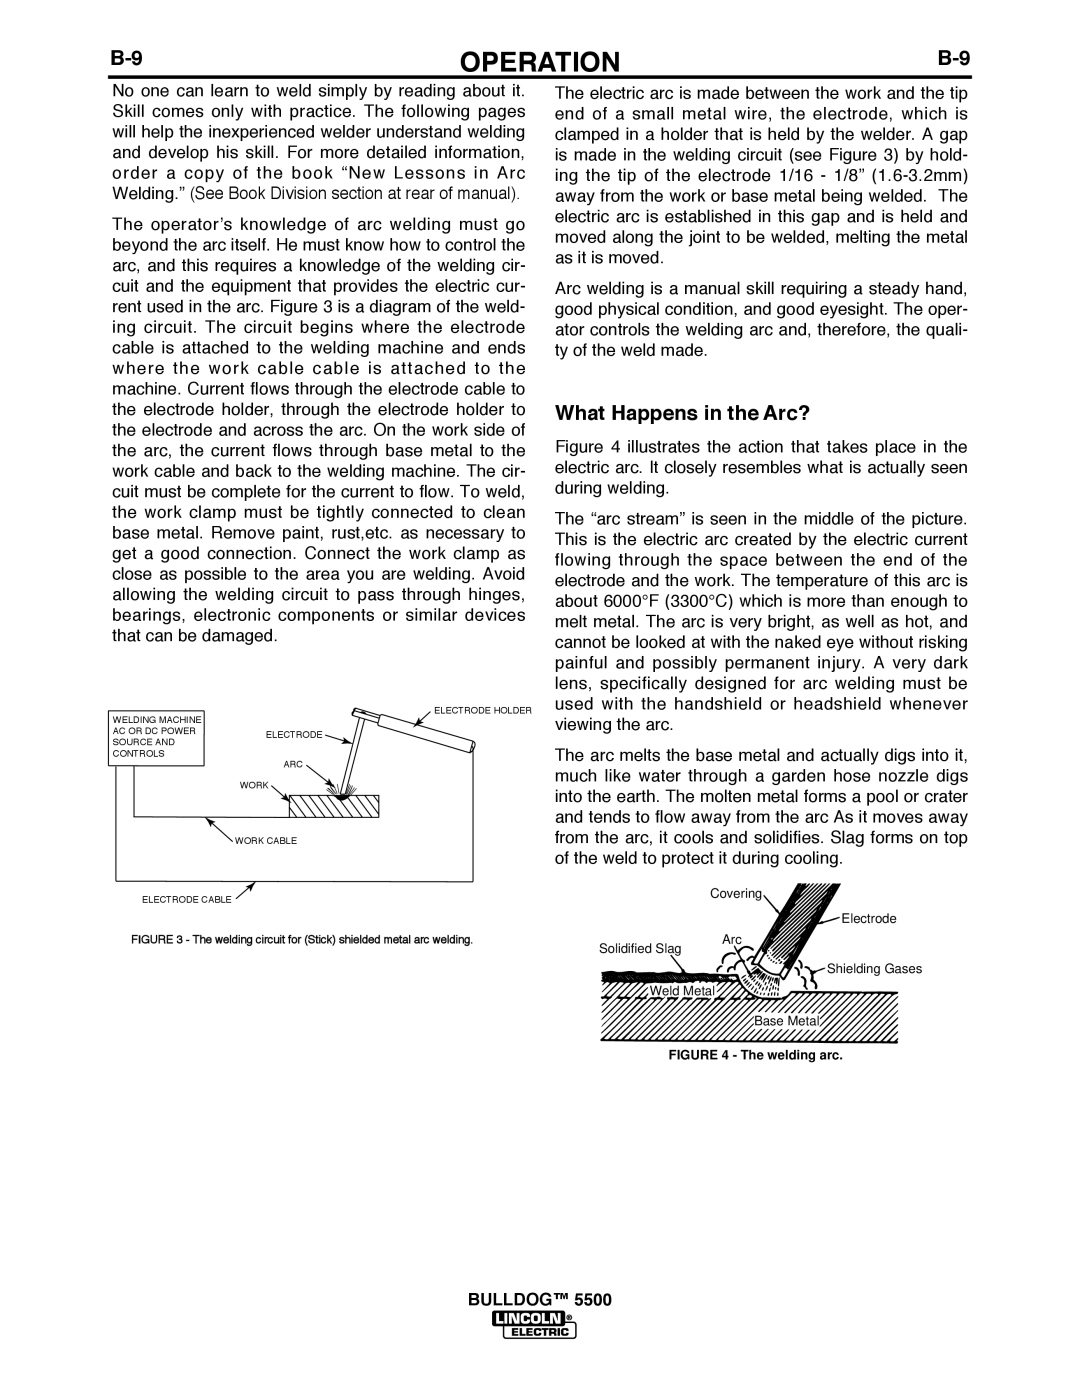 Lincoln Electric IM10074 manual Operation, What Happens in the Arc?, bULLDOG, The welding arc 